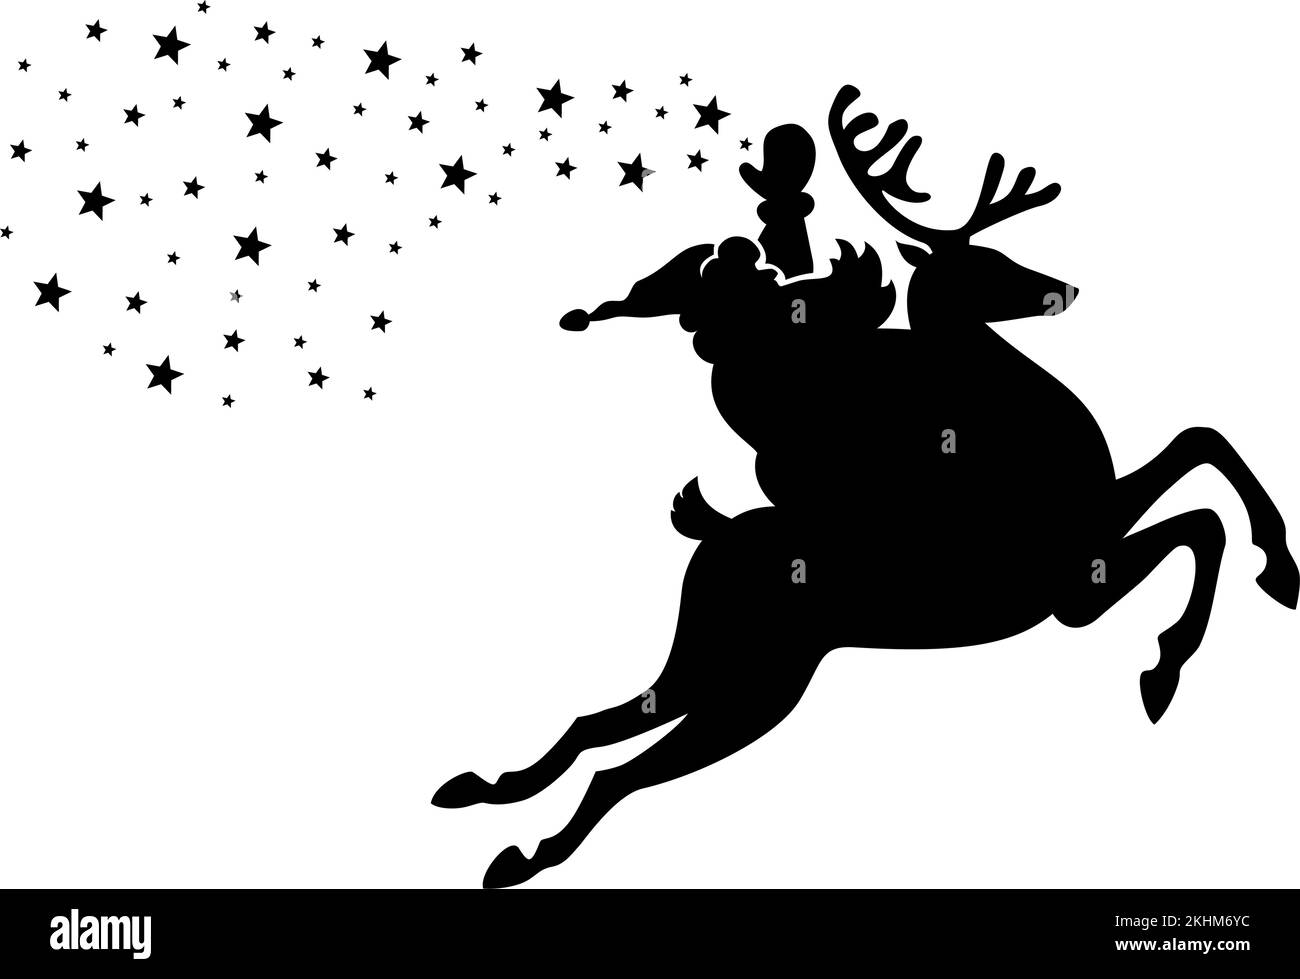 Santa Claus riding on reindeer and scatters Christmas stars. Vector silhouette on transparent background Stock Vector